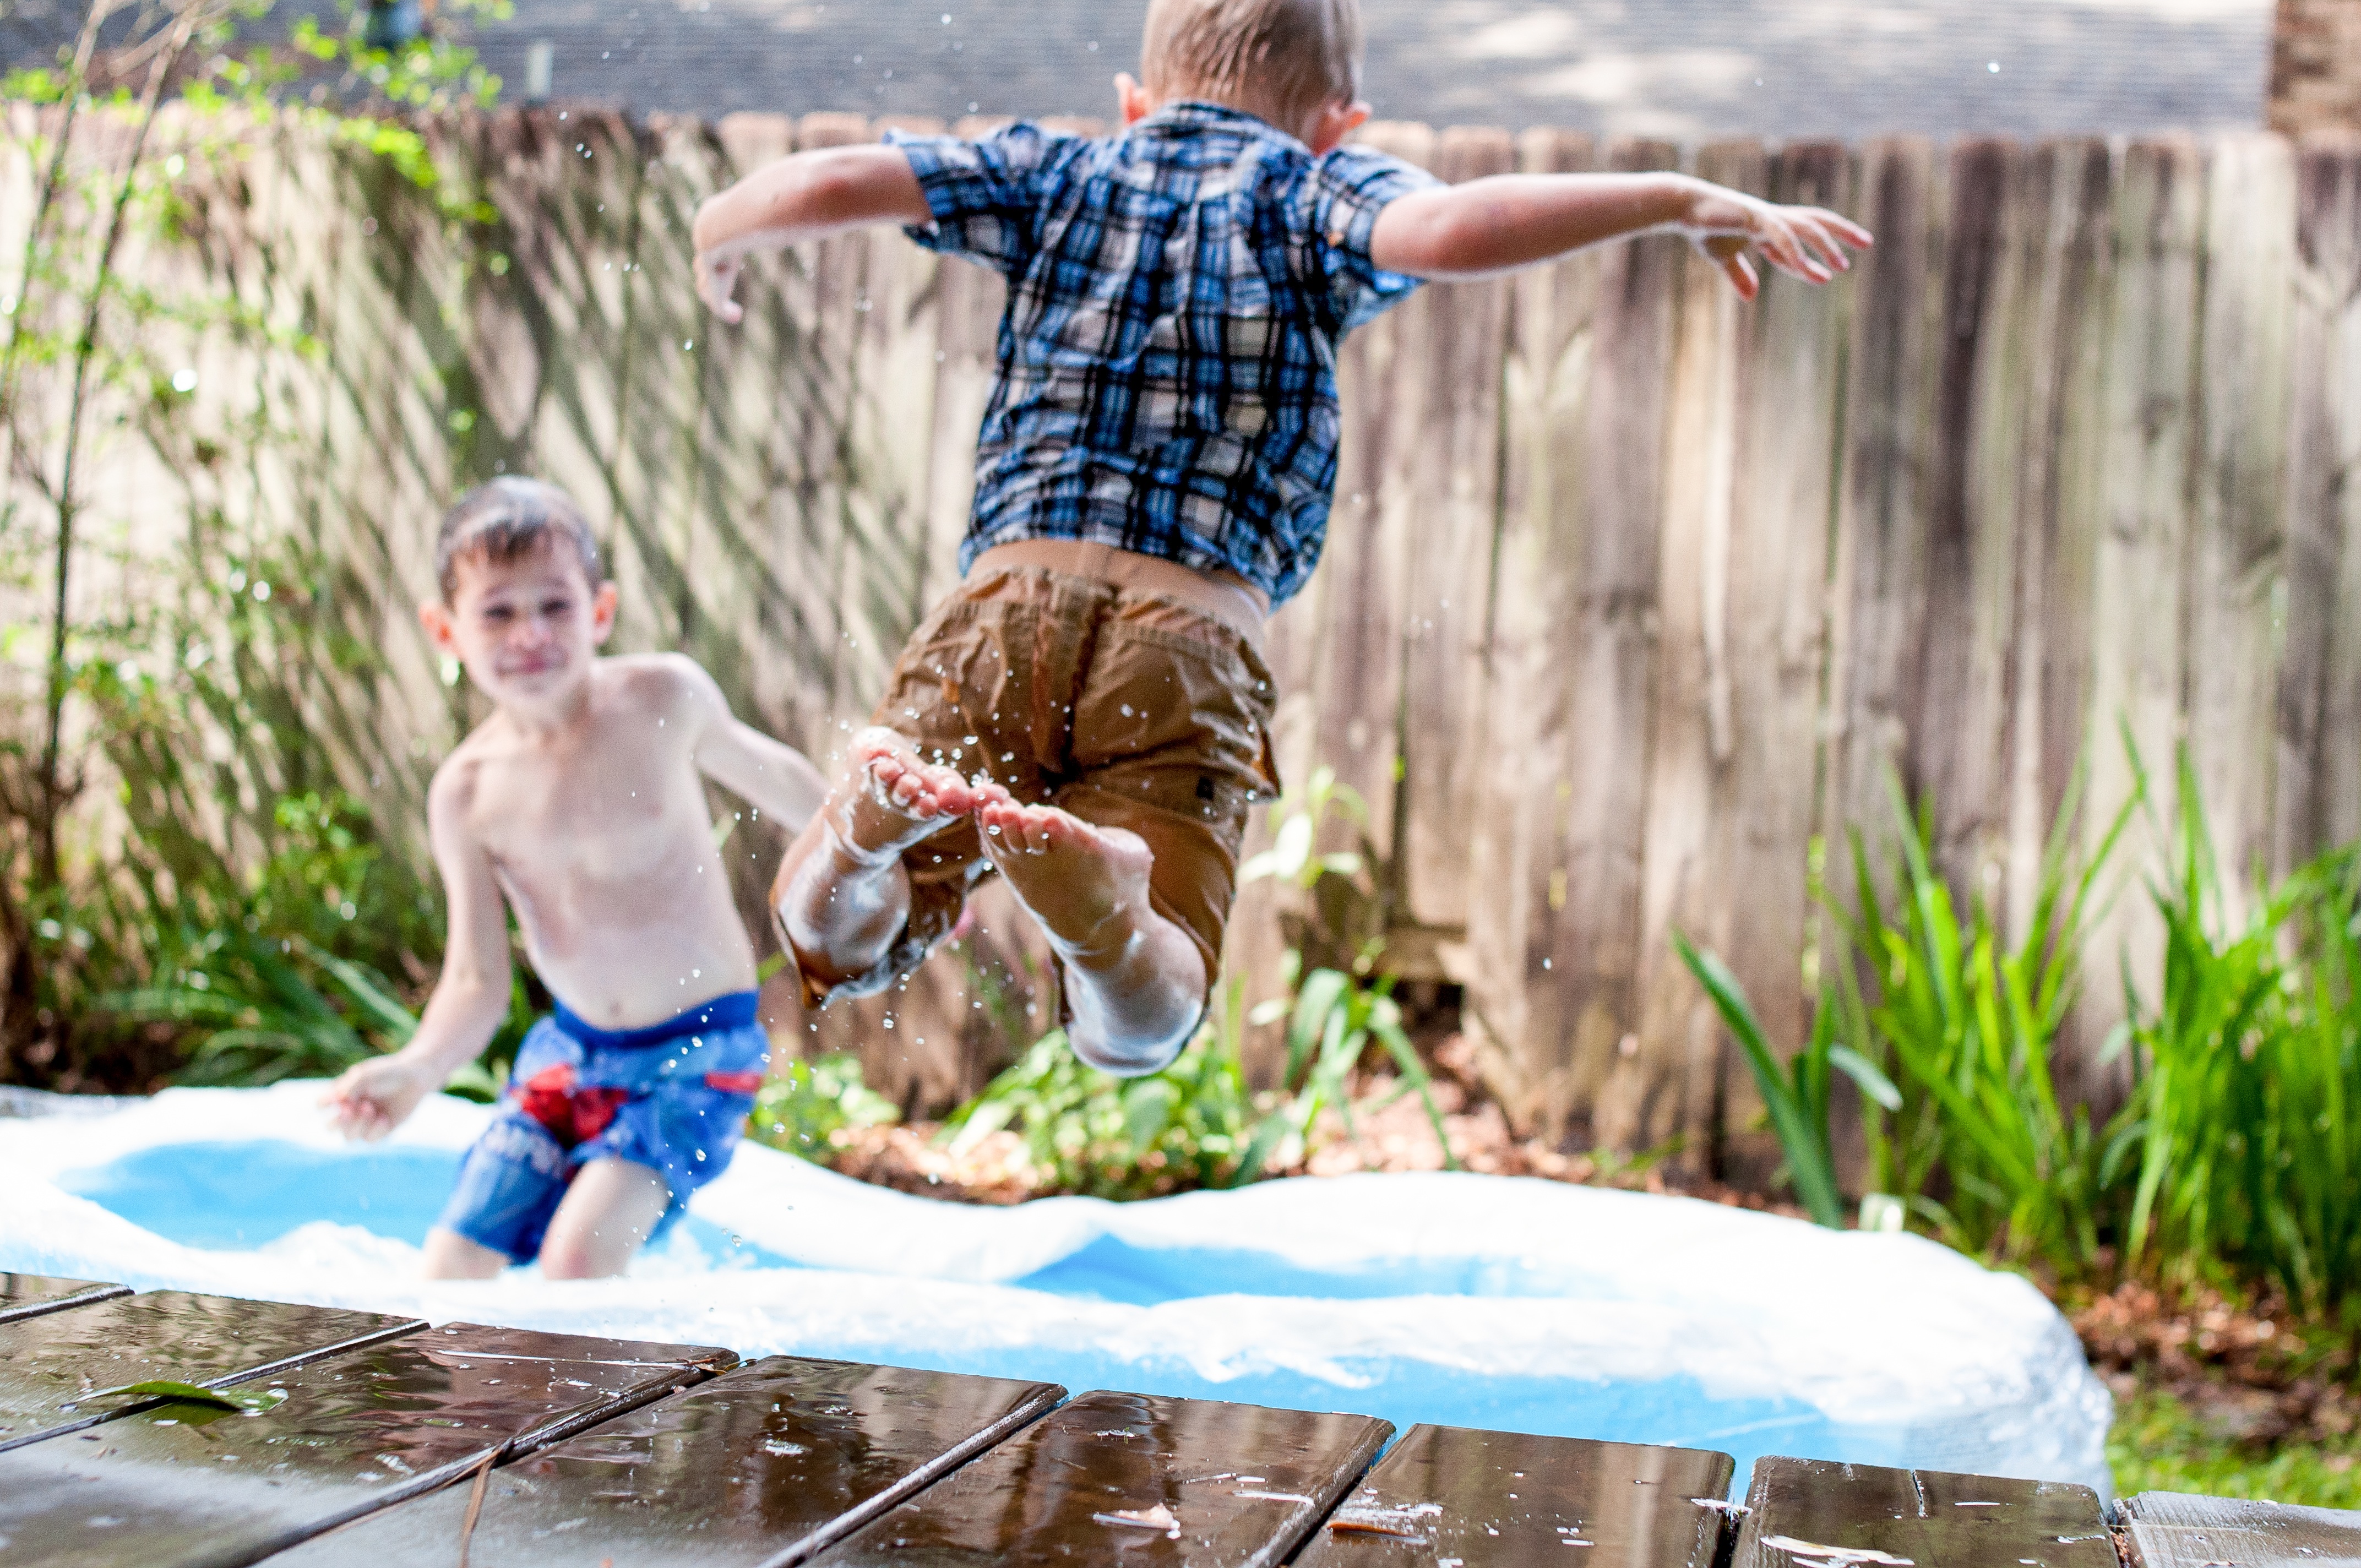 10 Fun Summer Activities To Do with Your Kids